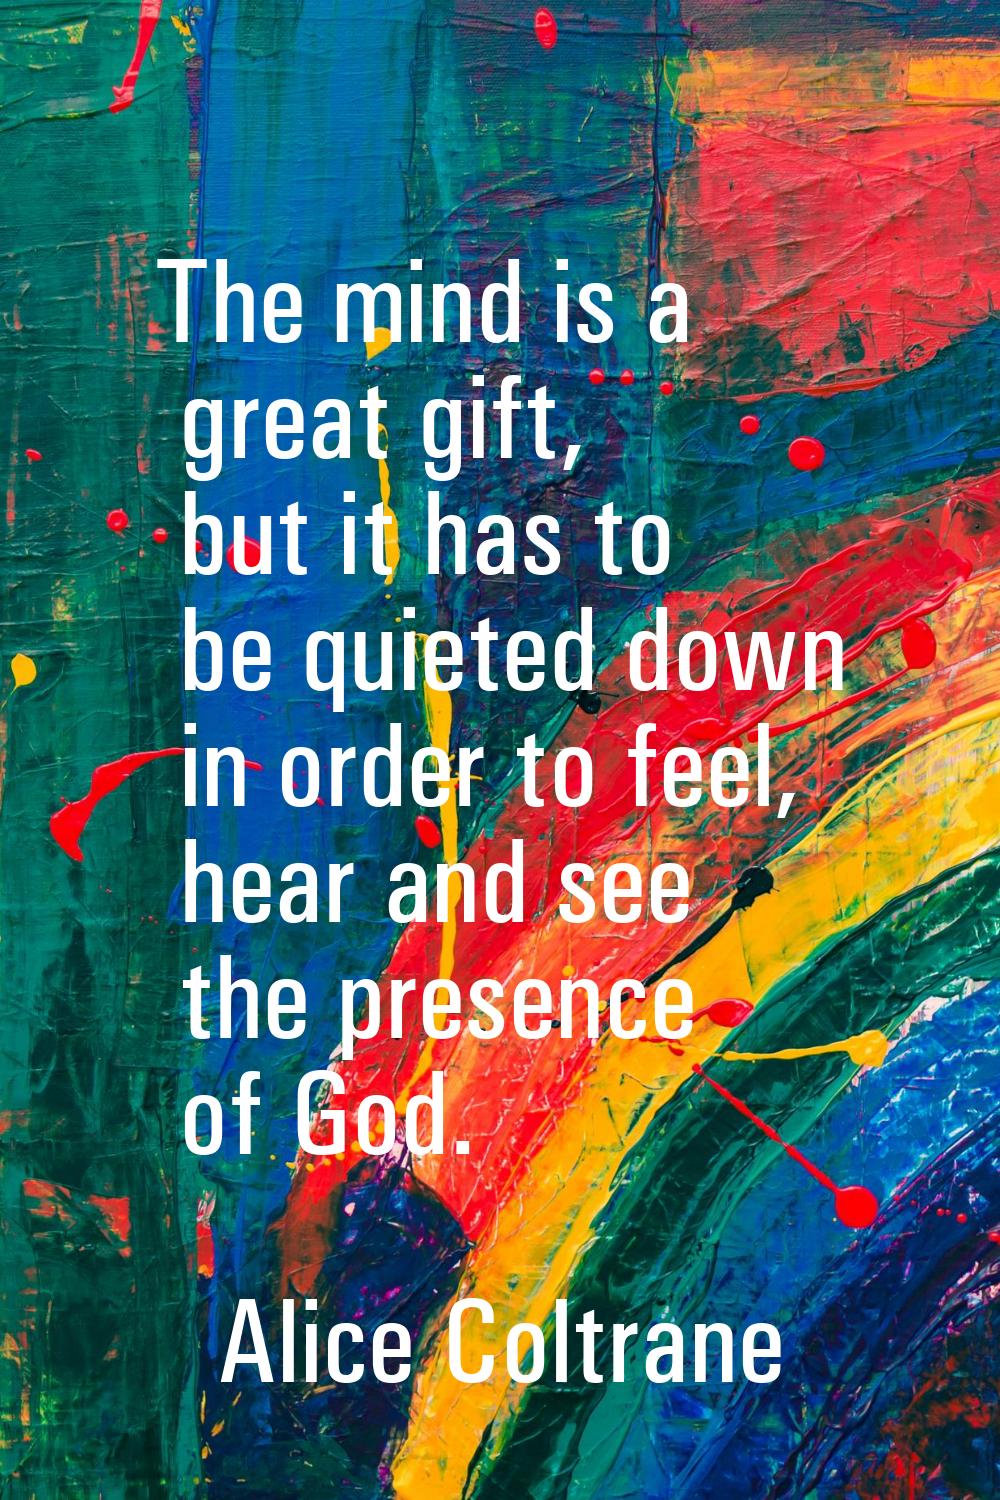 The mind is a great gift, but it has to be quieted down in order to feel, hear and see the presence